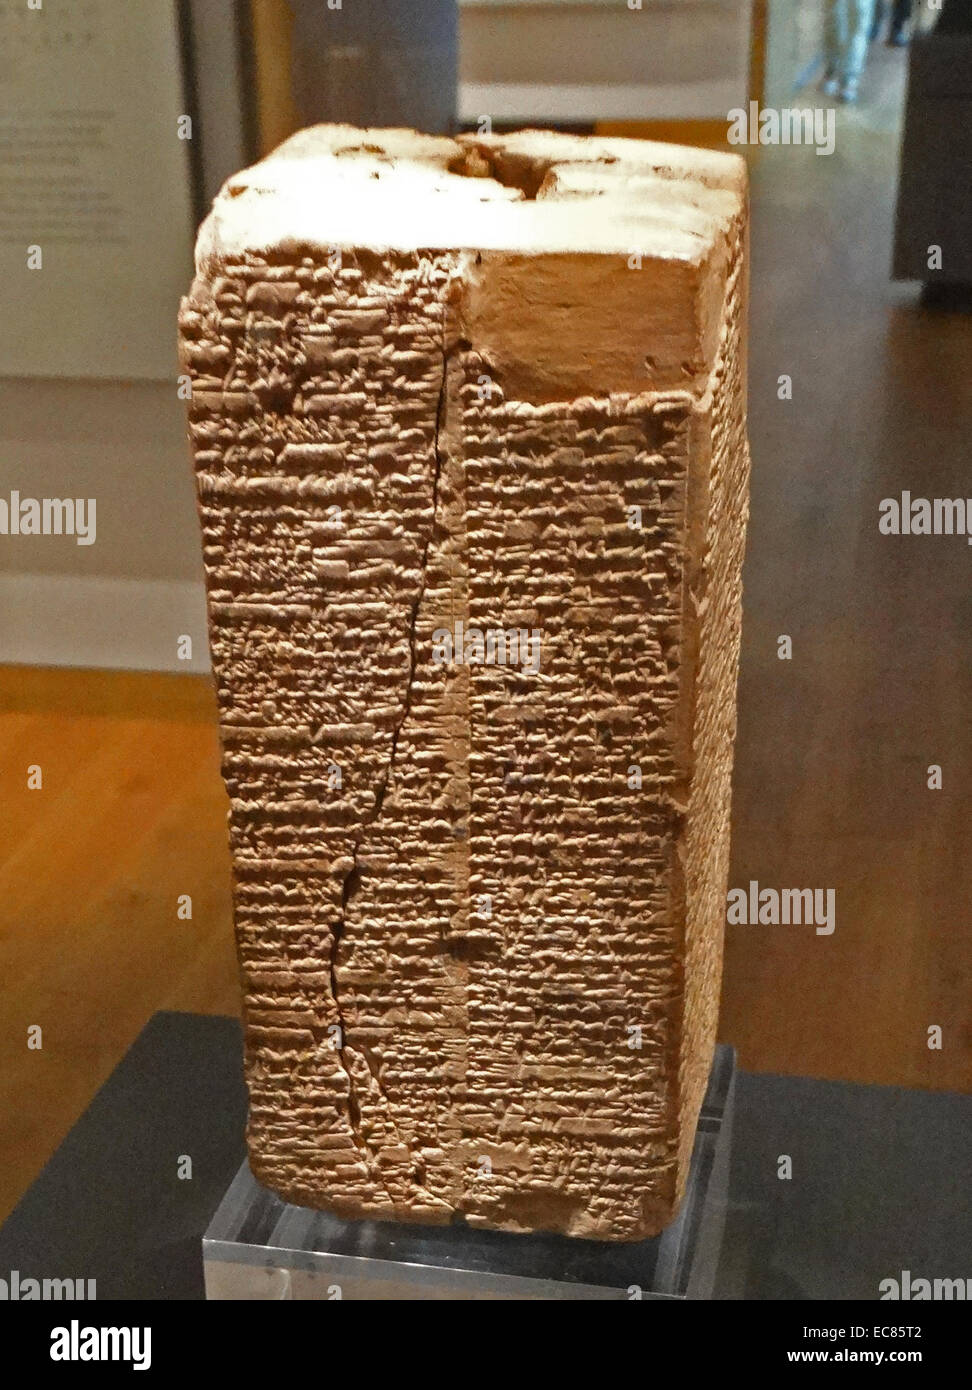 Sumerian 'King List' circa 1800 BC. Description of a great flood in Mesopotamia which may be connected to the Biblical story of Noah and the flood. Stock Photo